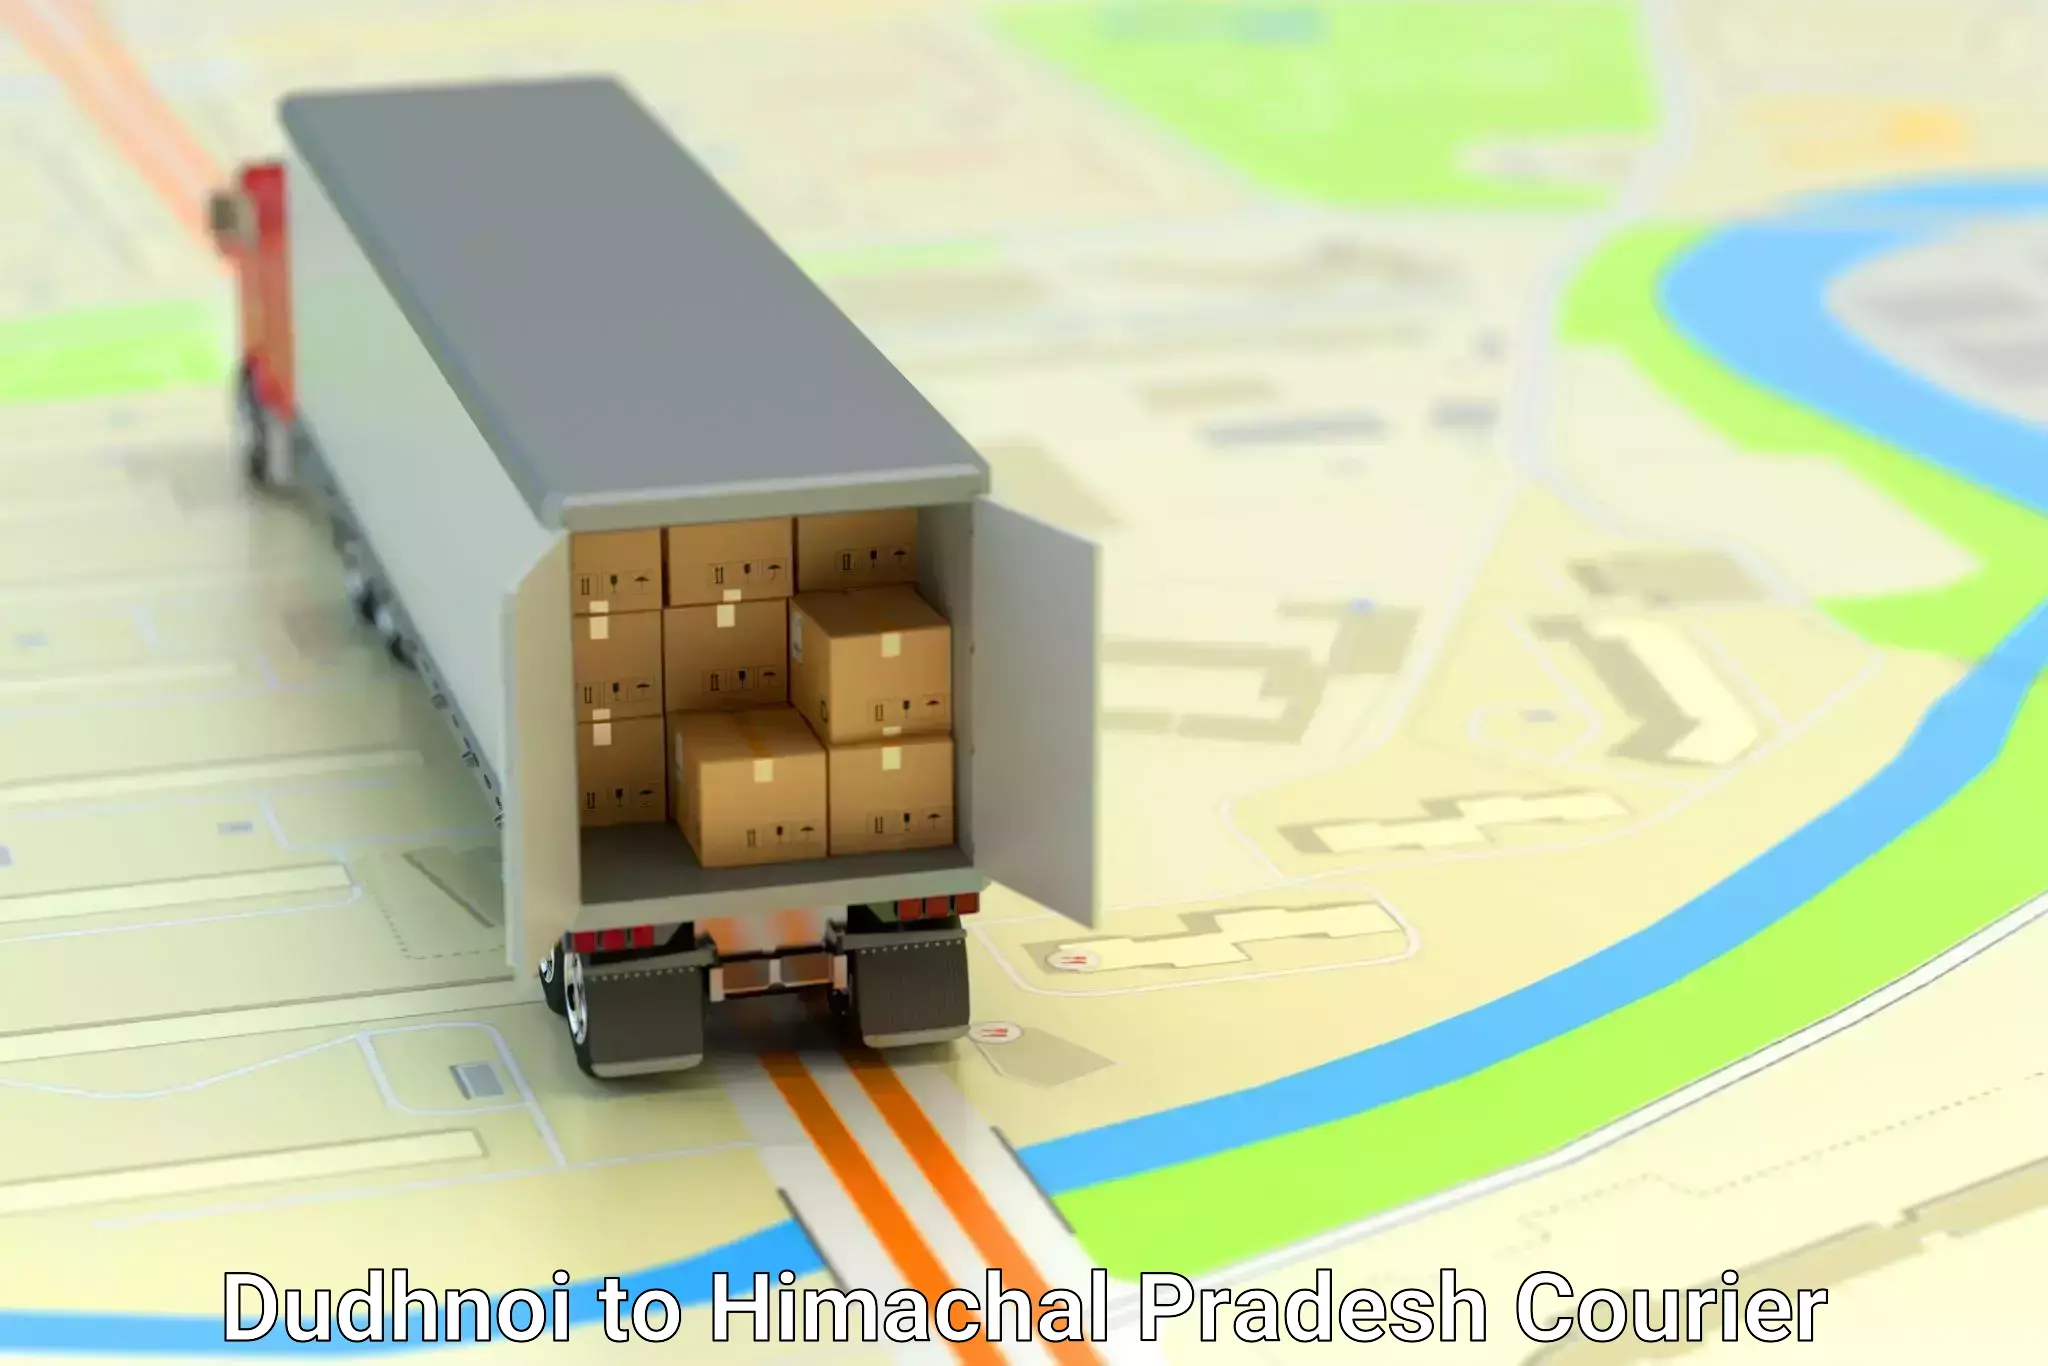 Custom courier packaging in Dudhnoi to Chintpurni